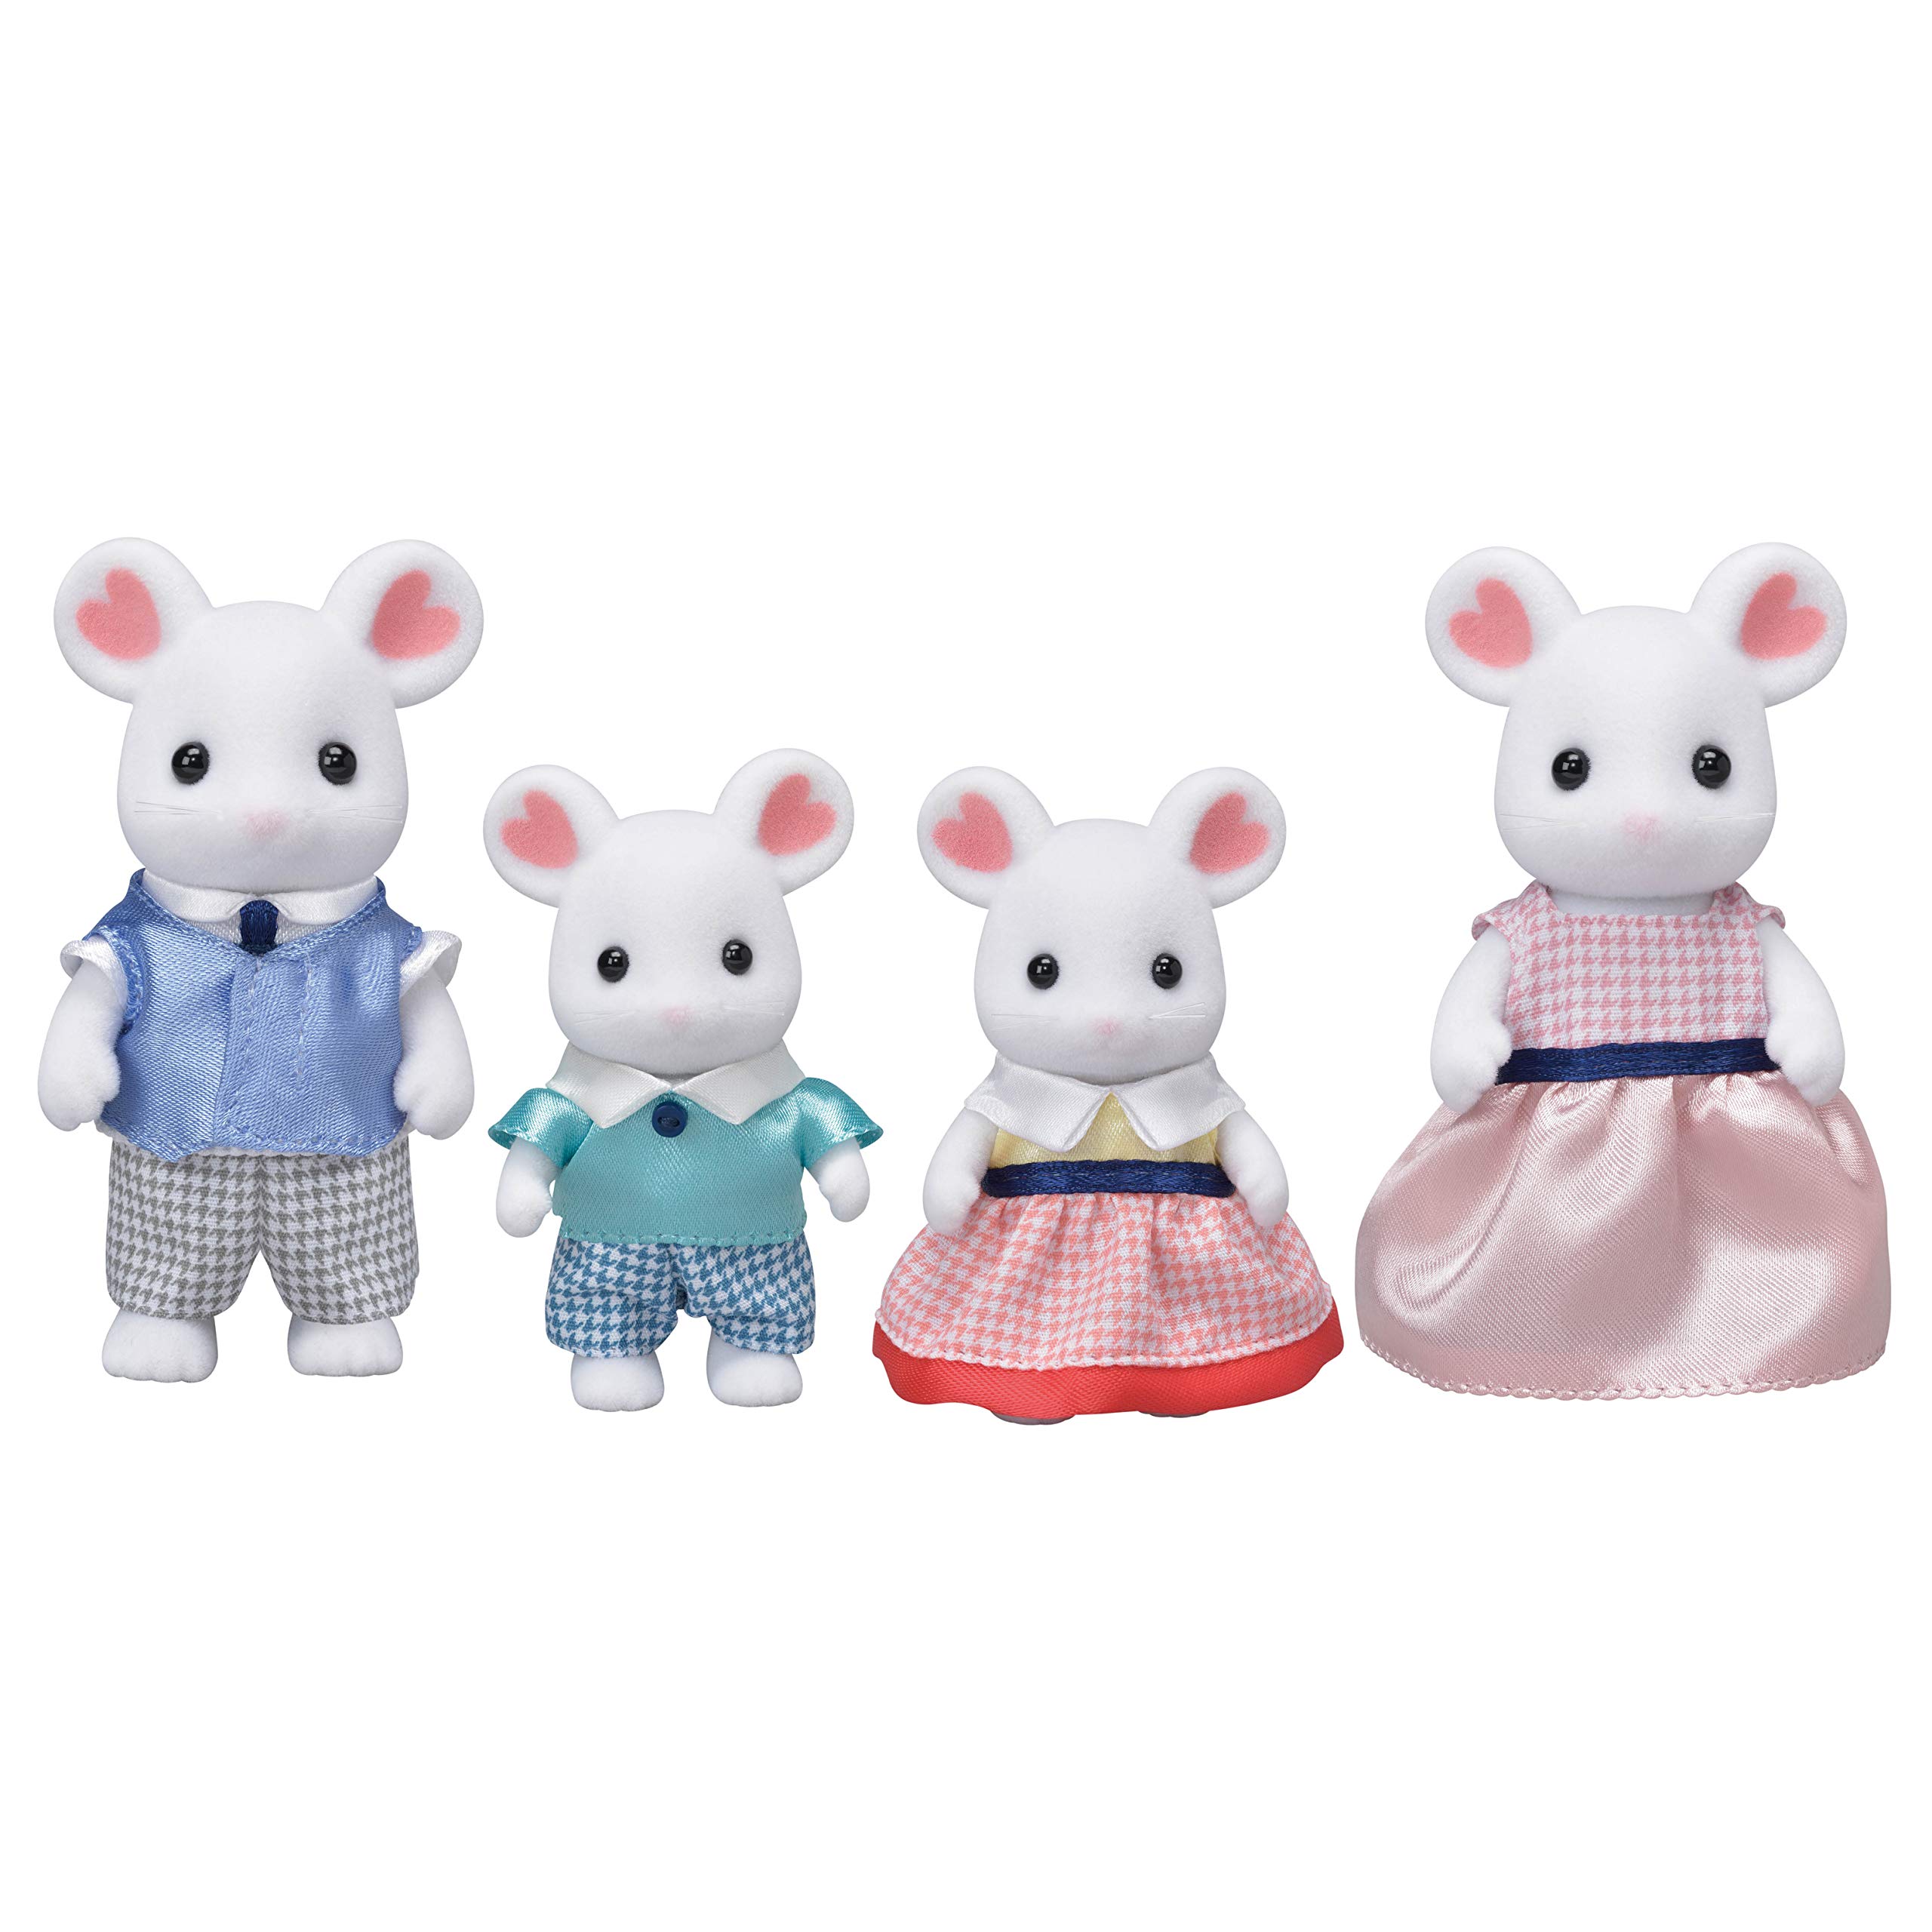 Calico Critters, Marshmallow Mouse Family, Dolls, Dollhouse Figures, Collectible Toys, 3 inches